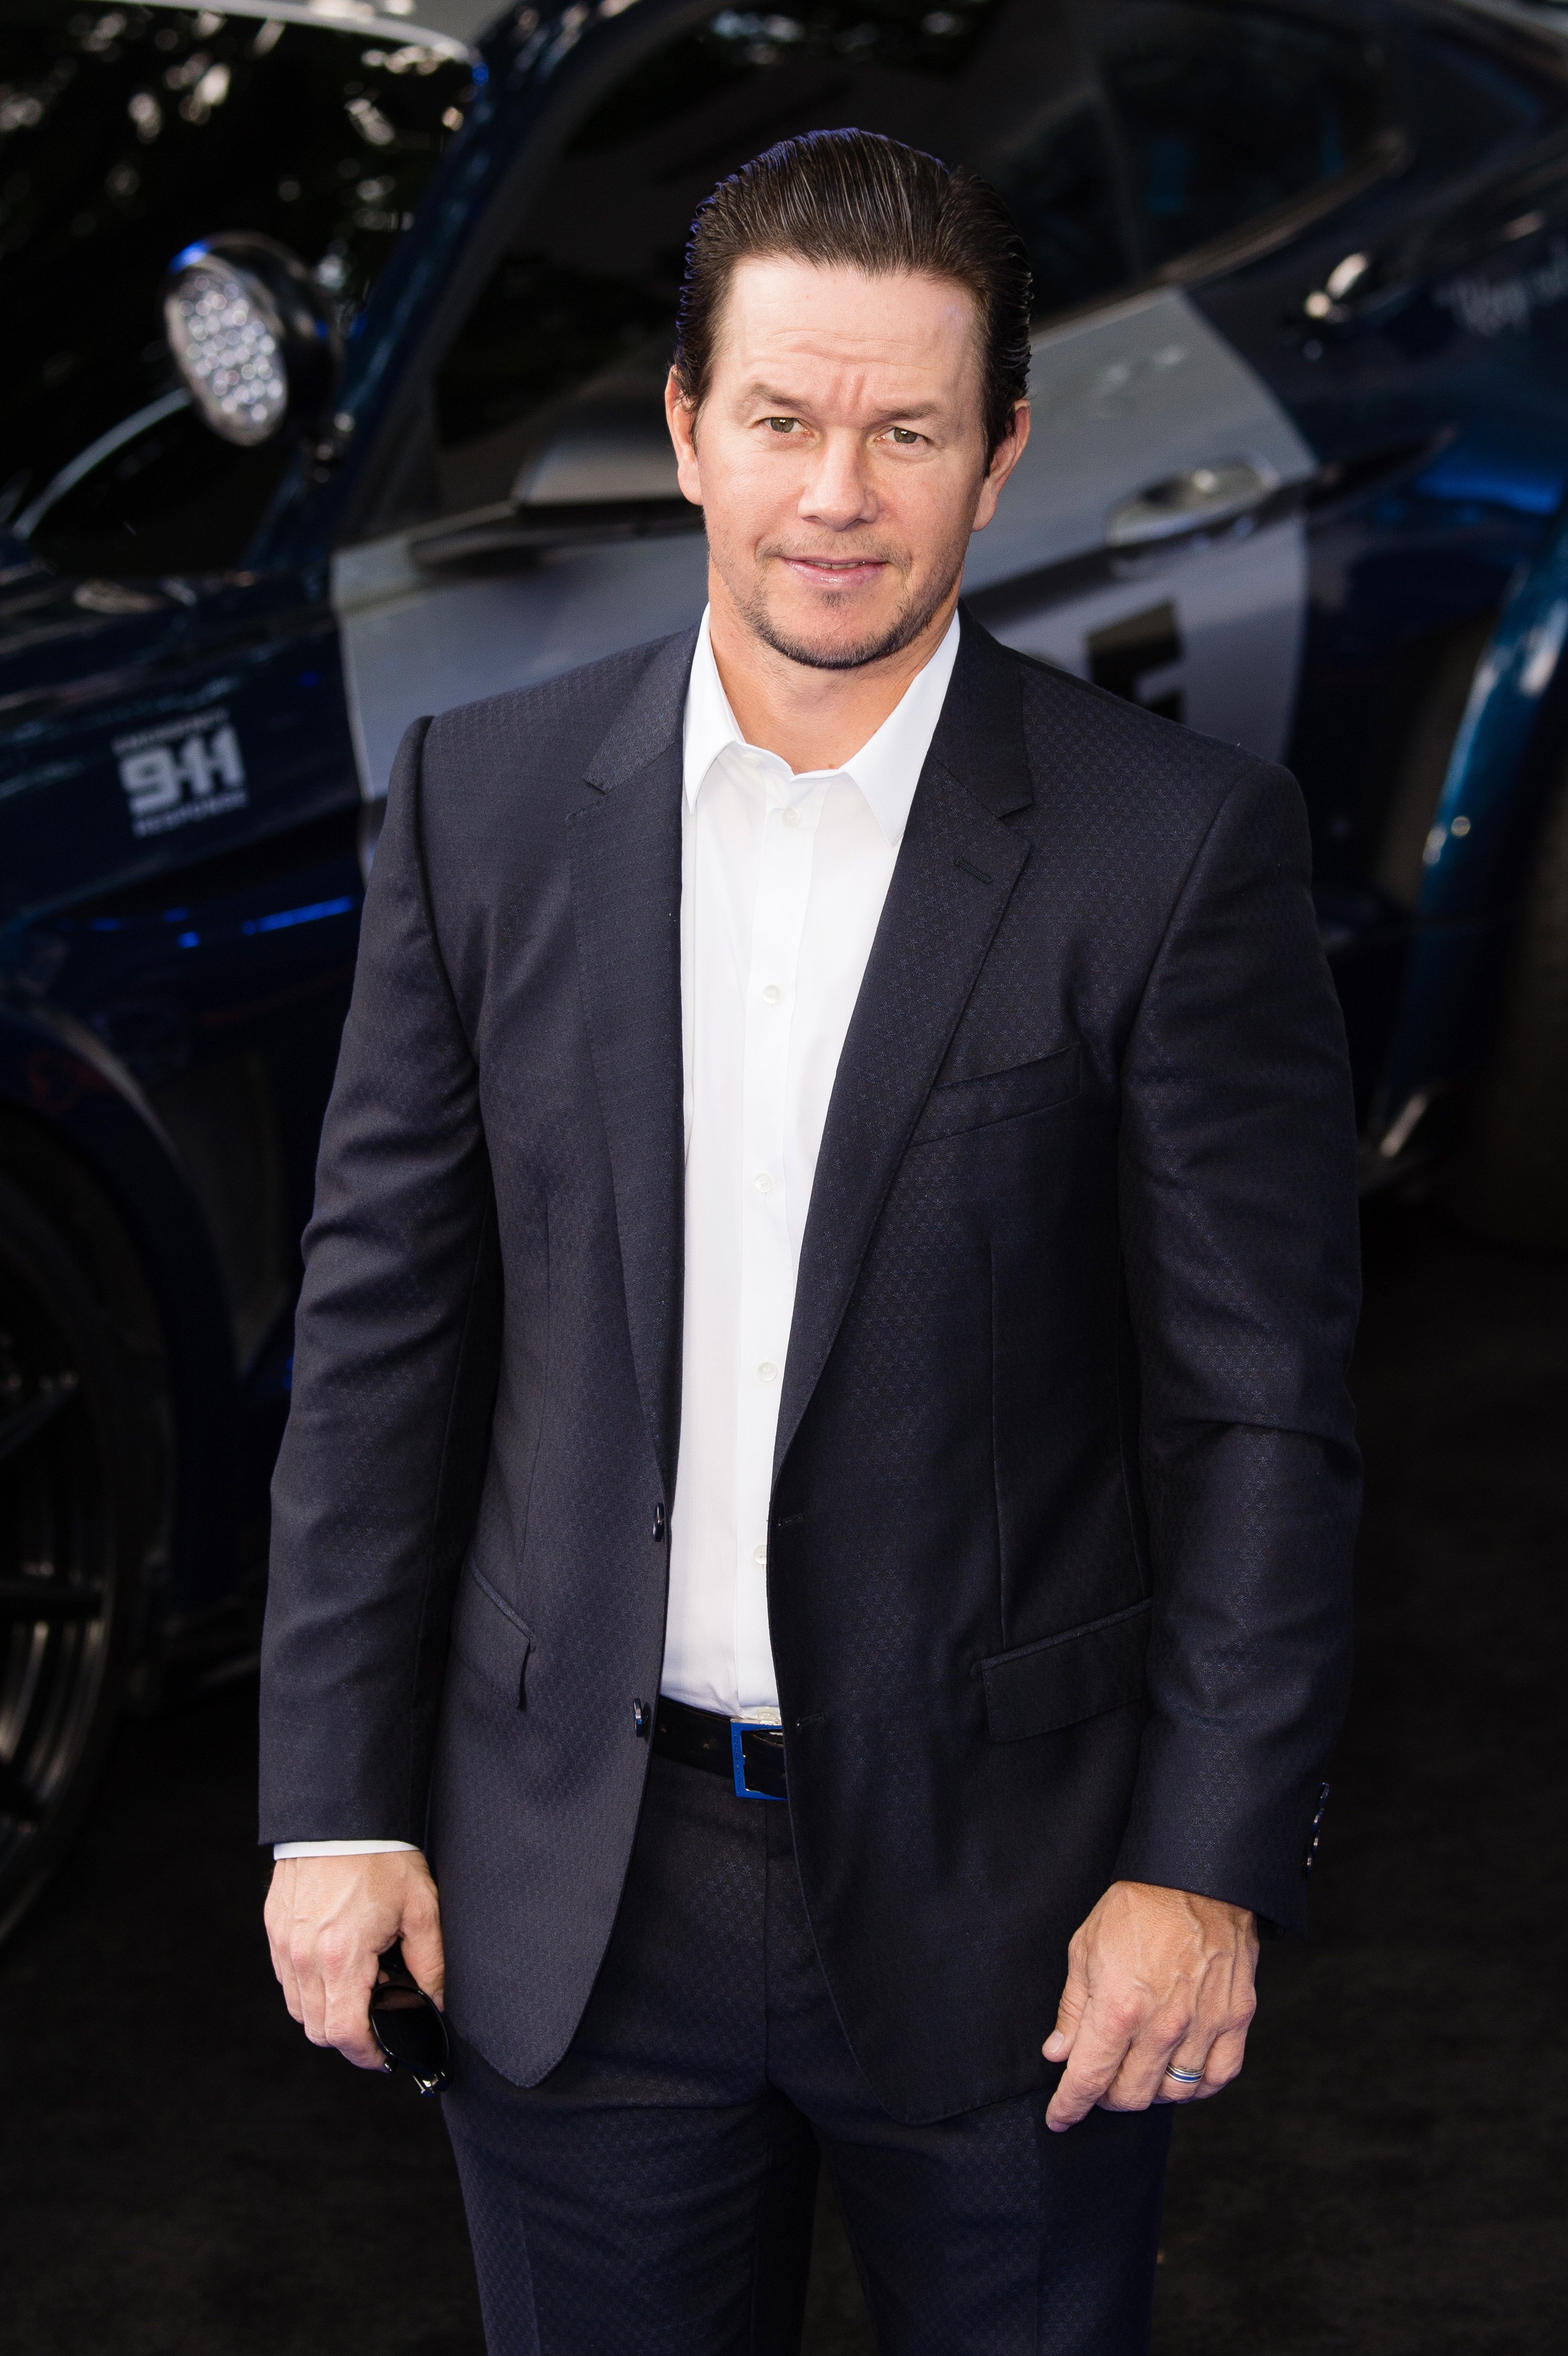 Mark Wahlberg attends the global premiere of "Transformers: The Last Knight" on June 18, 2017, in London, England. | Source: Getty Images.